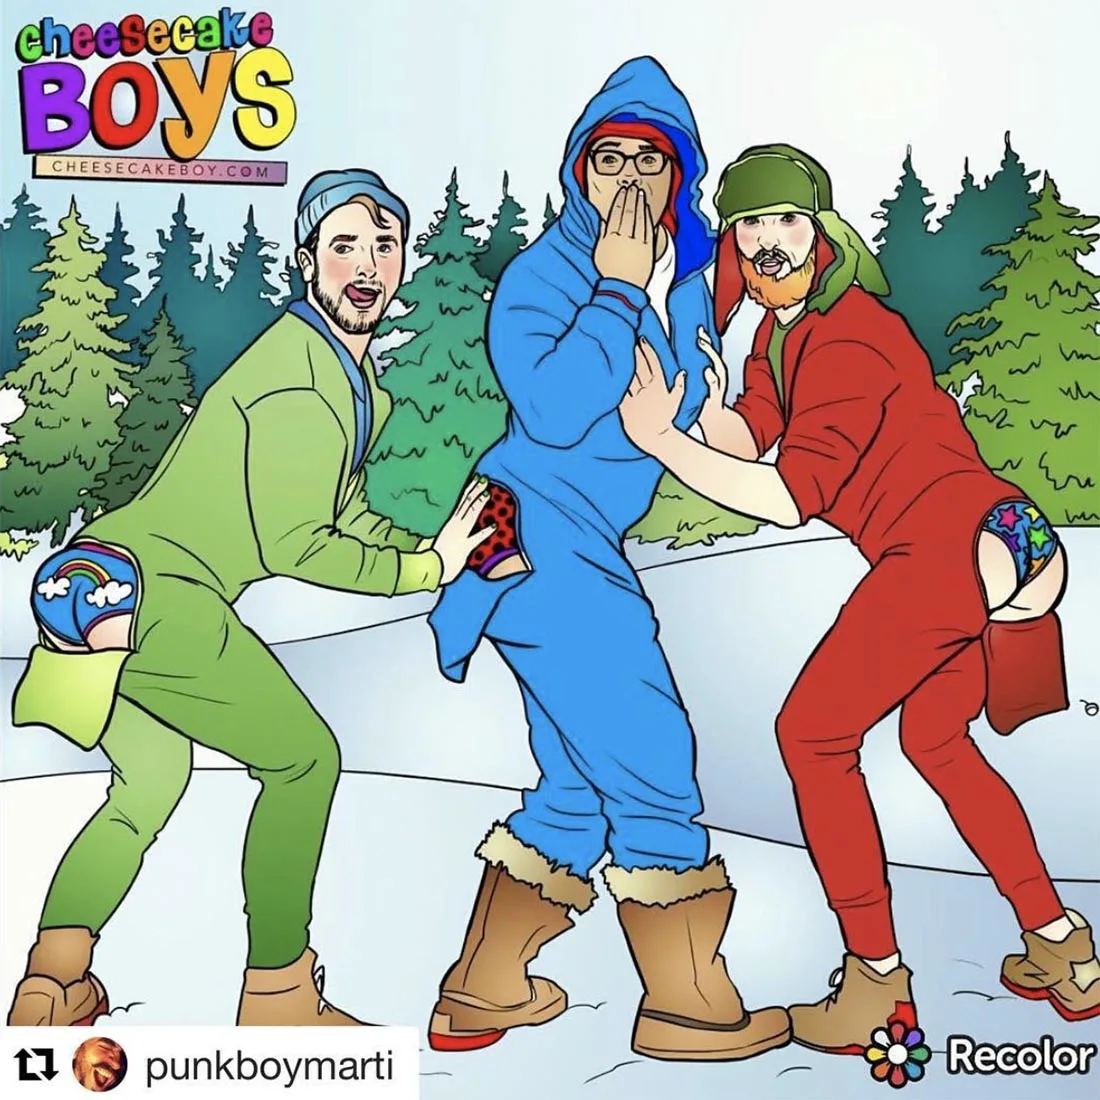 Painted in versin of Paulyworld's coloring pages - Gay Artwork on Instagram